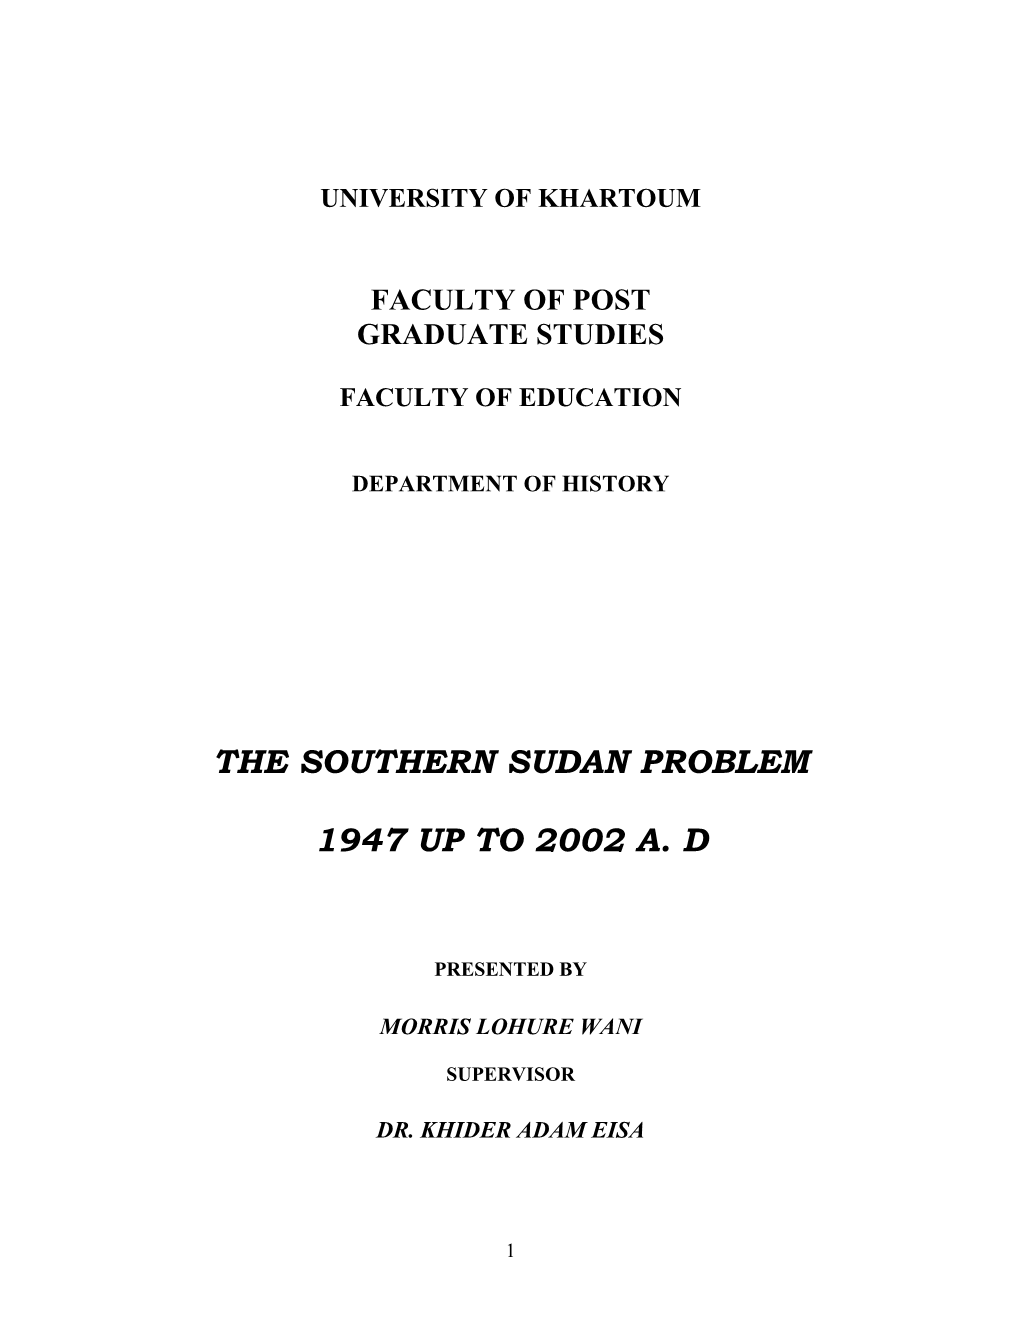 The Southern Sudan Problem 1947 up to 2002 A. D